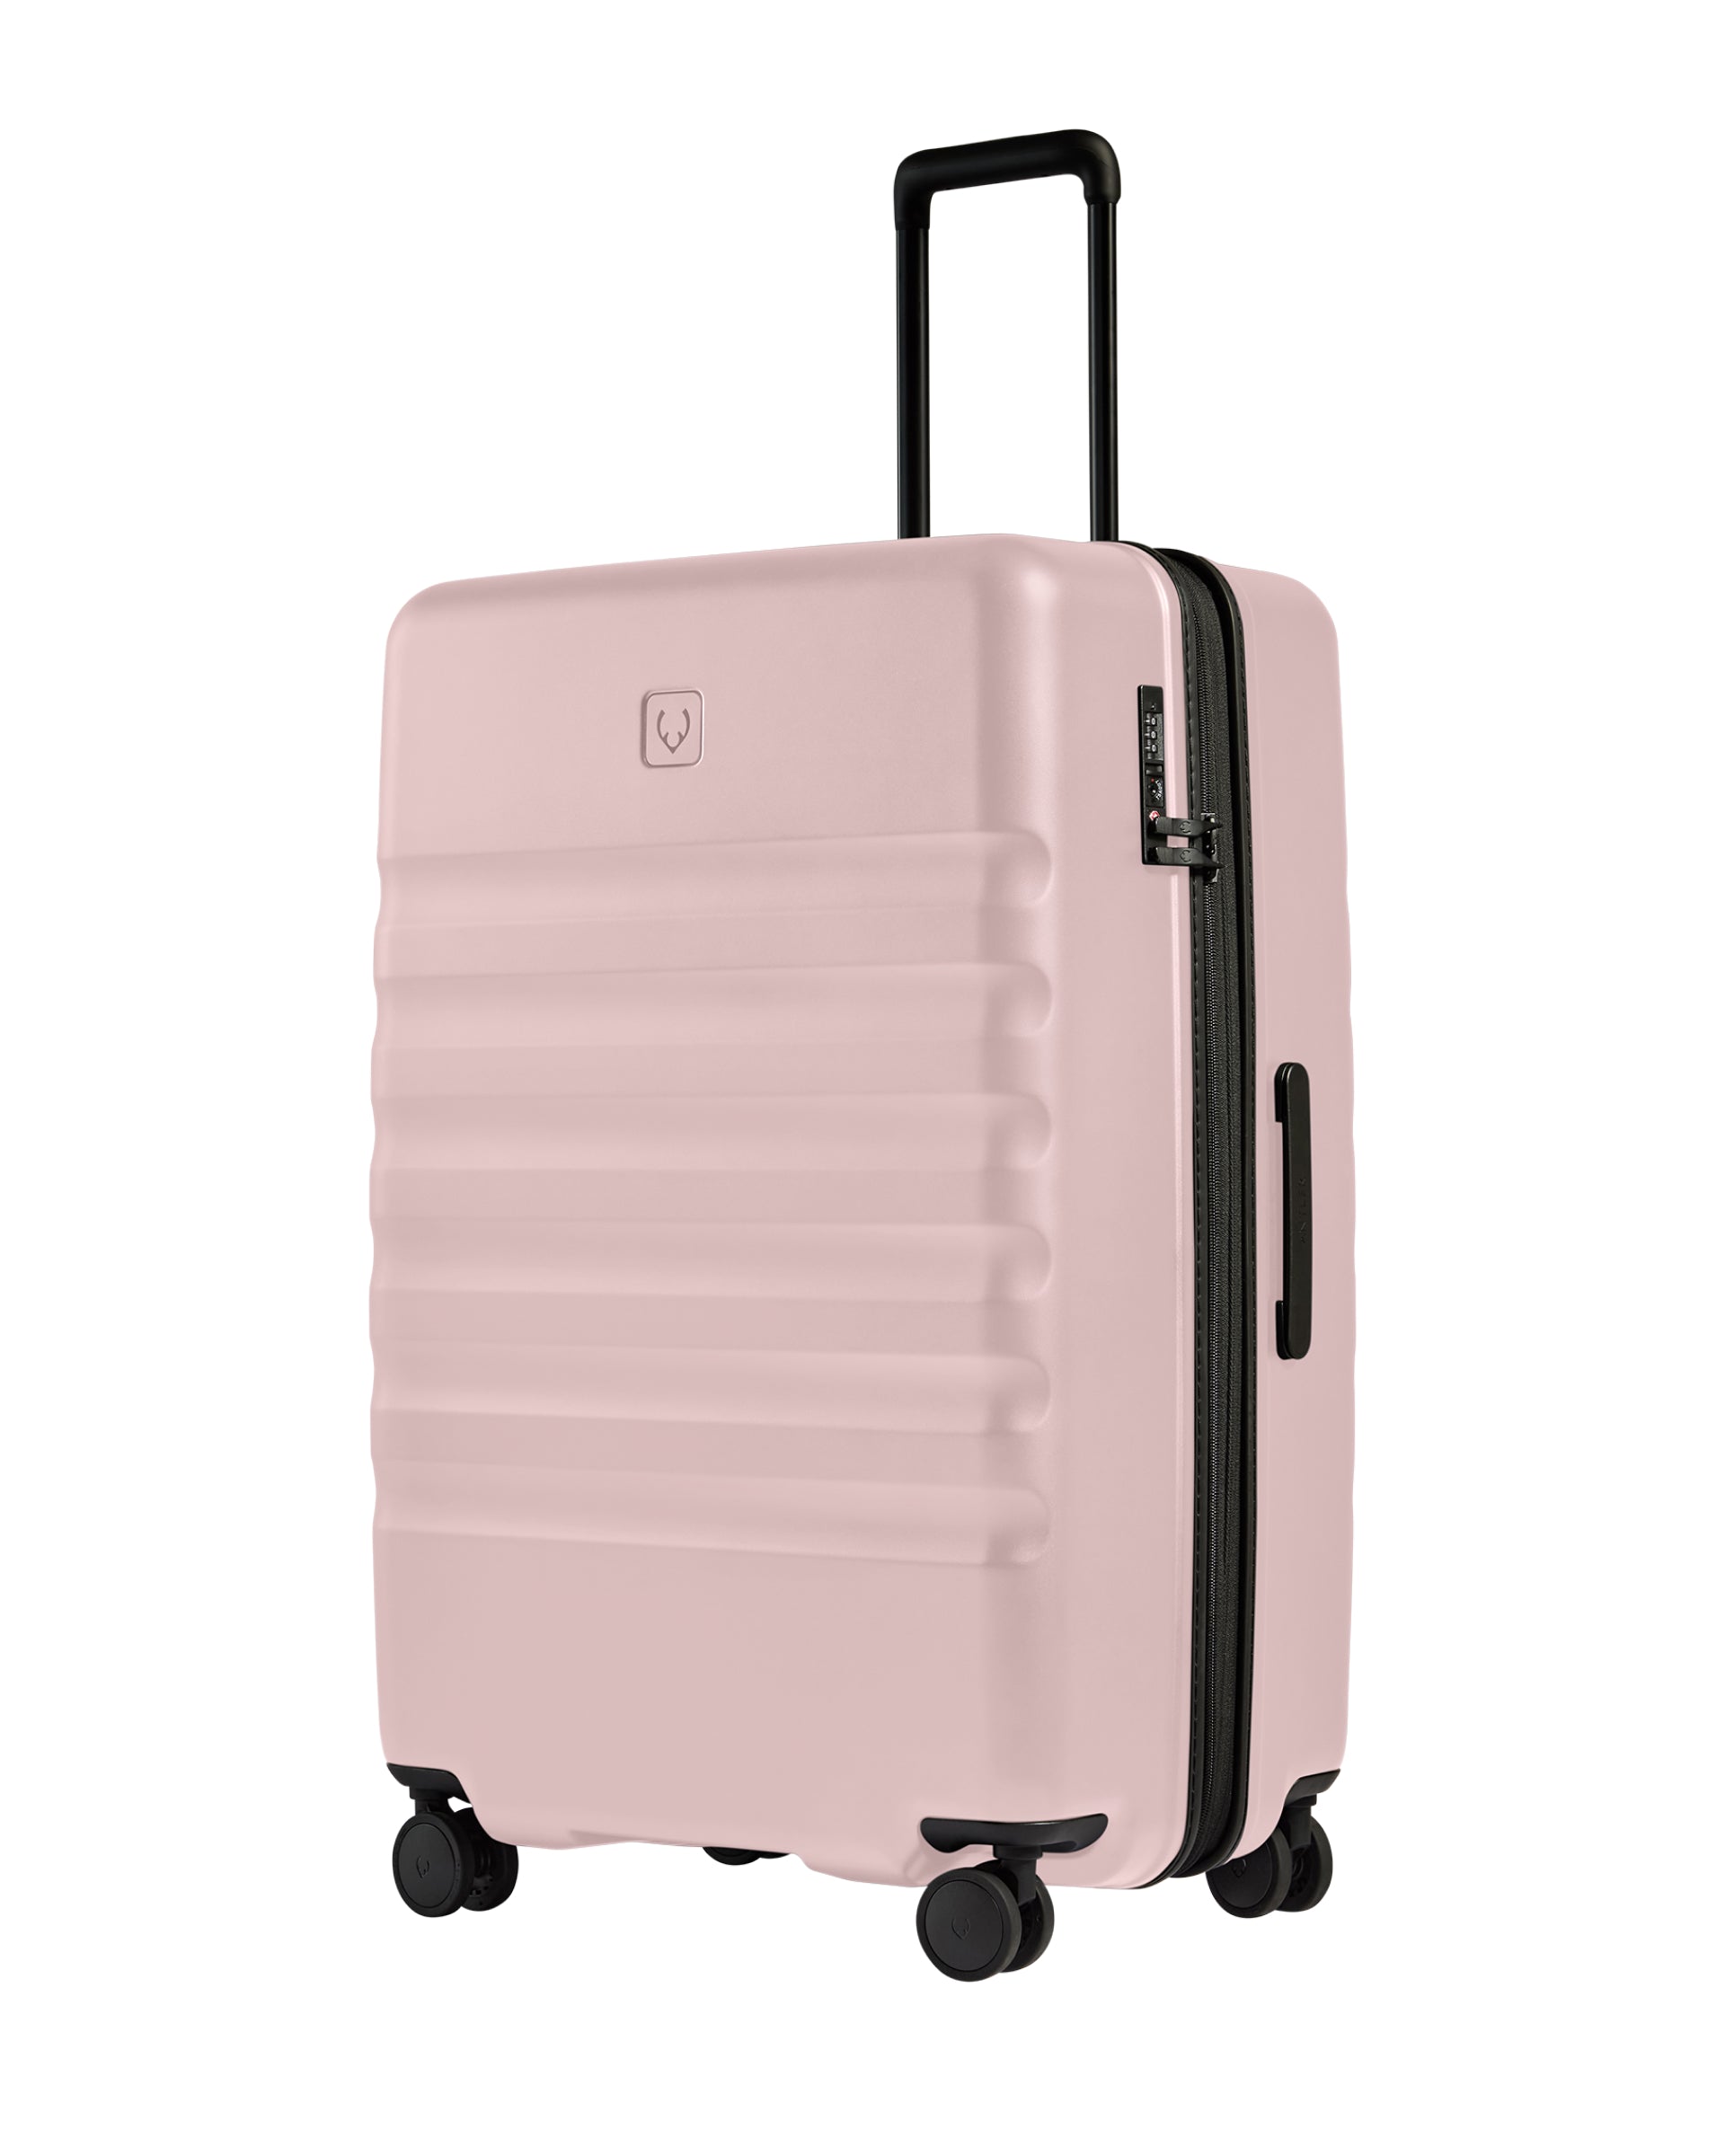 View Antler Icon Stripe Large Suitcase In Moorland Pink Size 336cm x 78cm x 517cm information